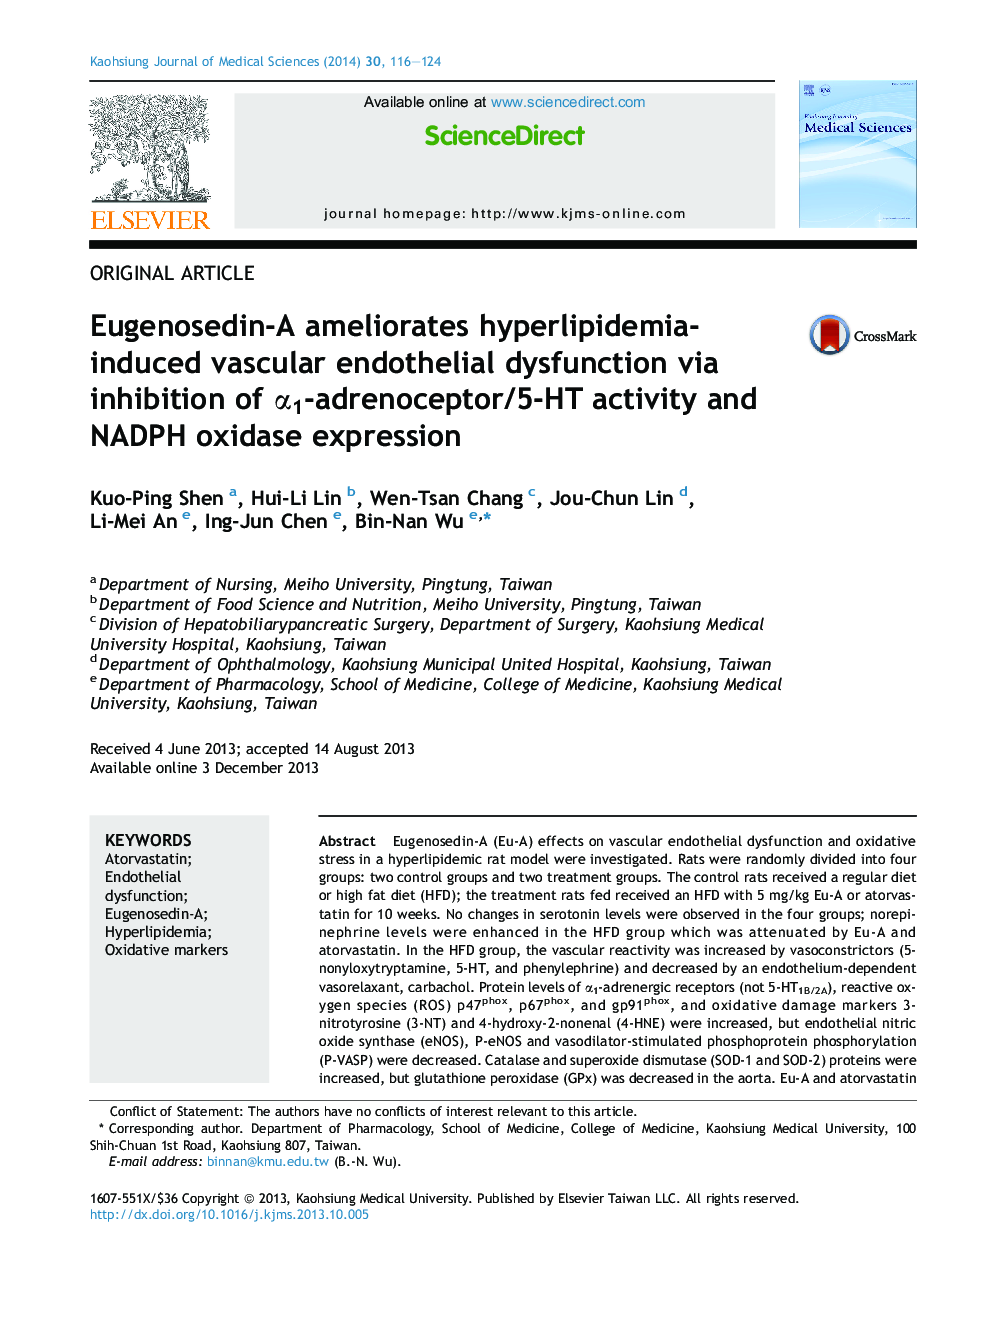 Eugenosedin-A ameliorates hyperlipidemia-induced vascular endothelial dysfunction via inhibition of α1-adrenoceptor/5-HT activity and NADPH oxidase expression 